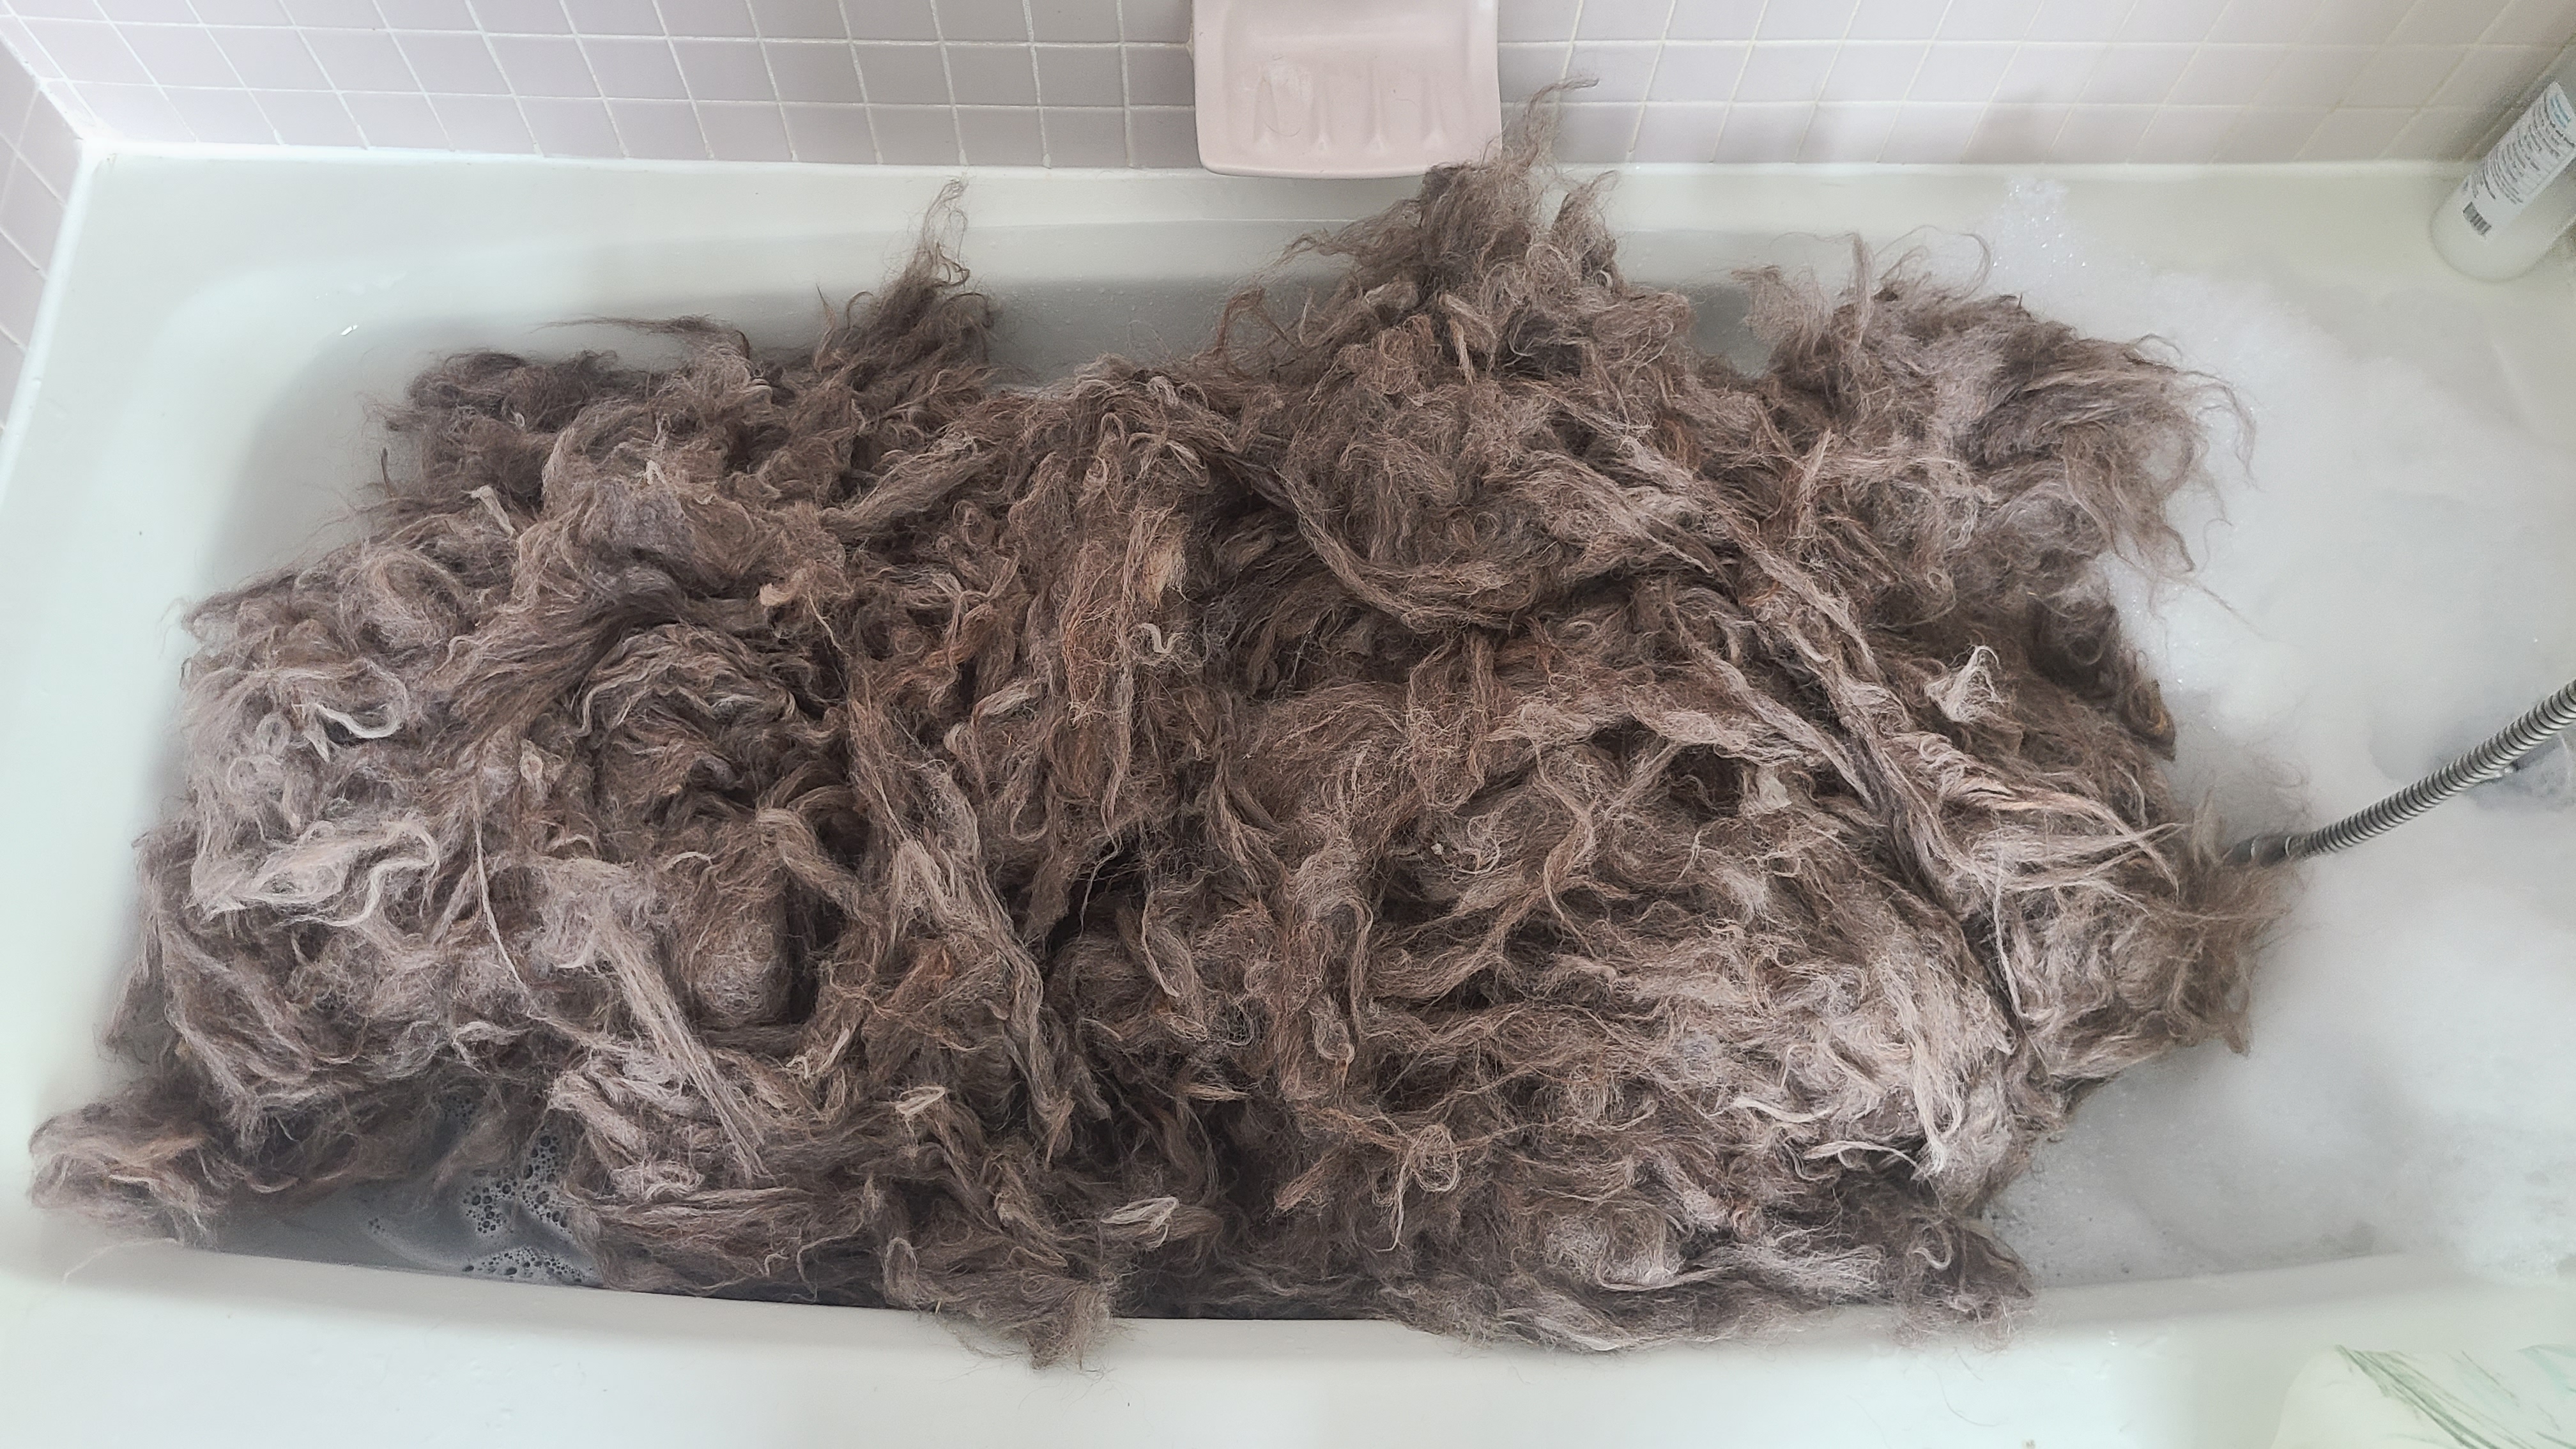 Fiber before the wash